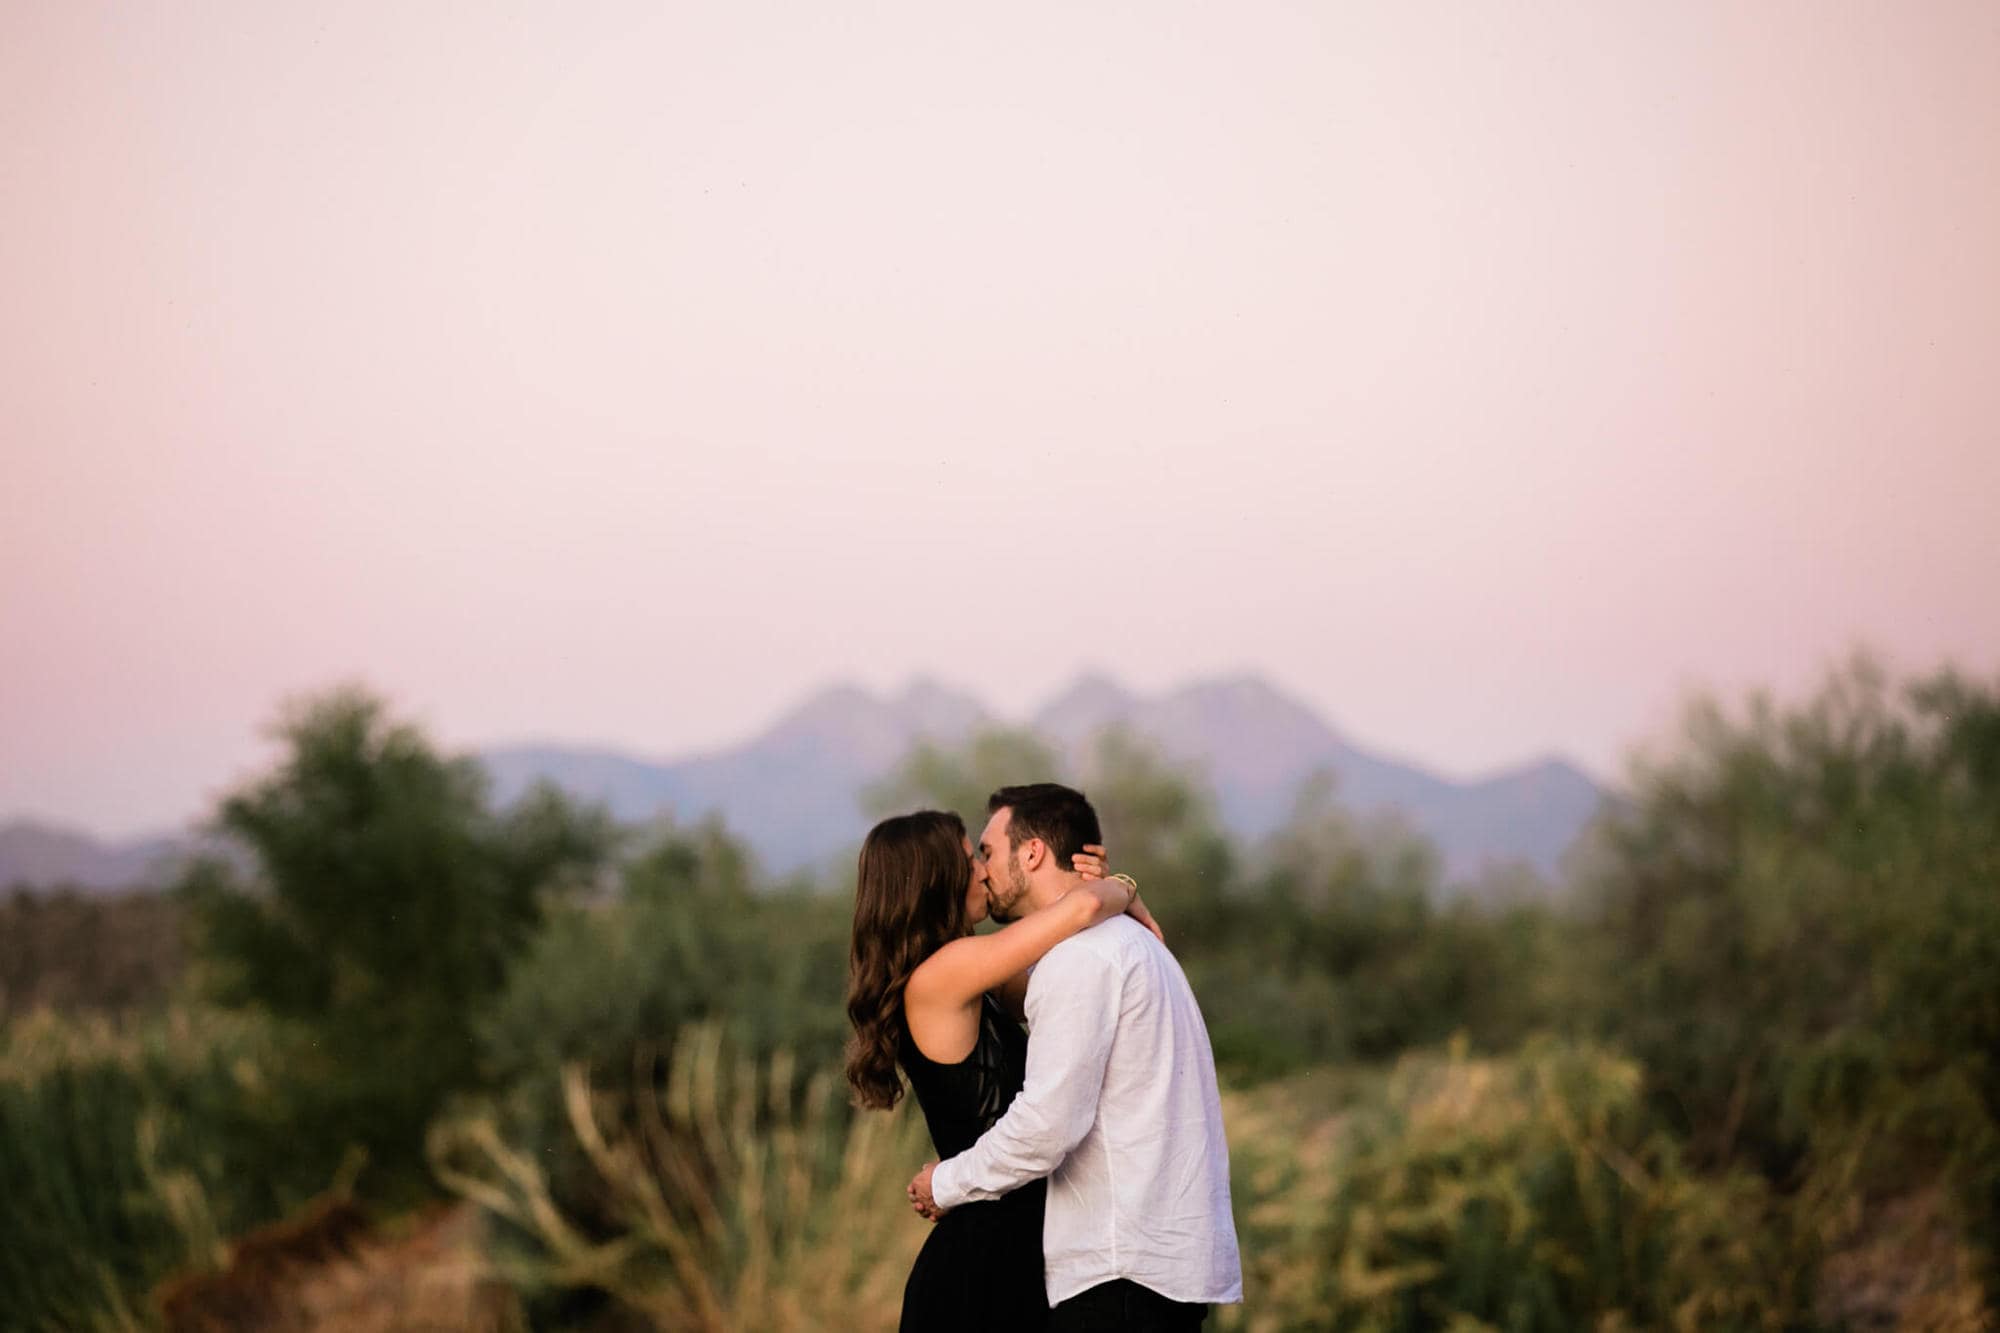 Nicole and Logan kiss with the pink dusk sky behind them and Four Peaks in perfect view.